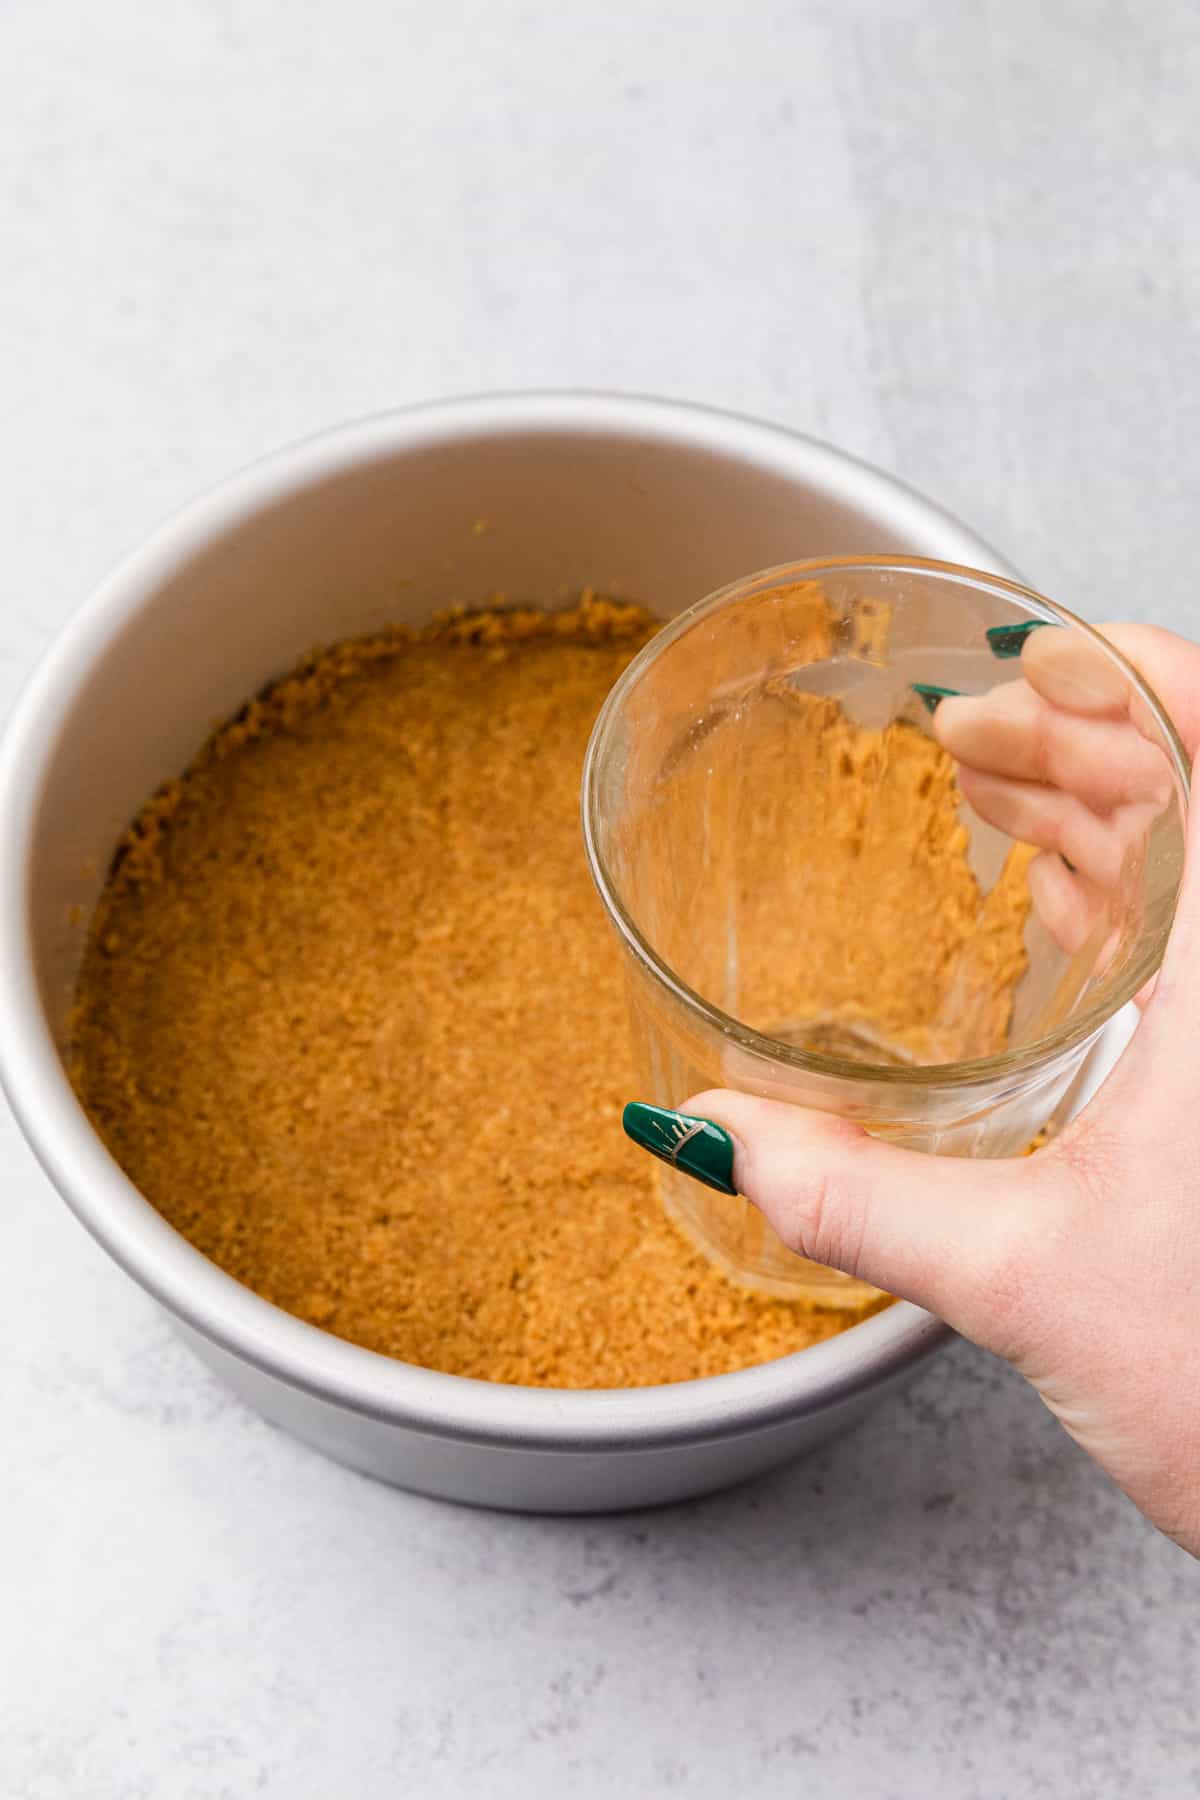 a glass pressing crumbs into a pan